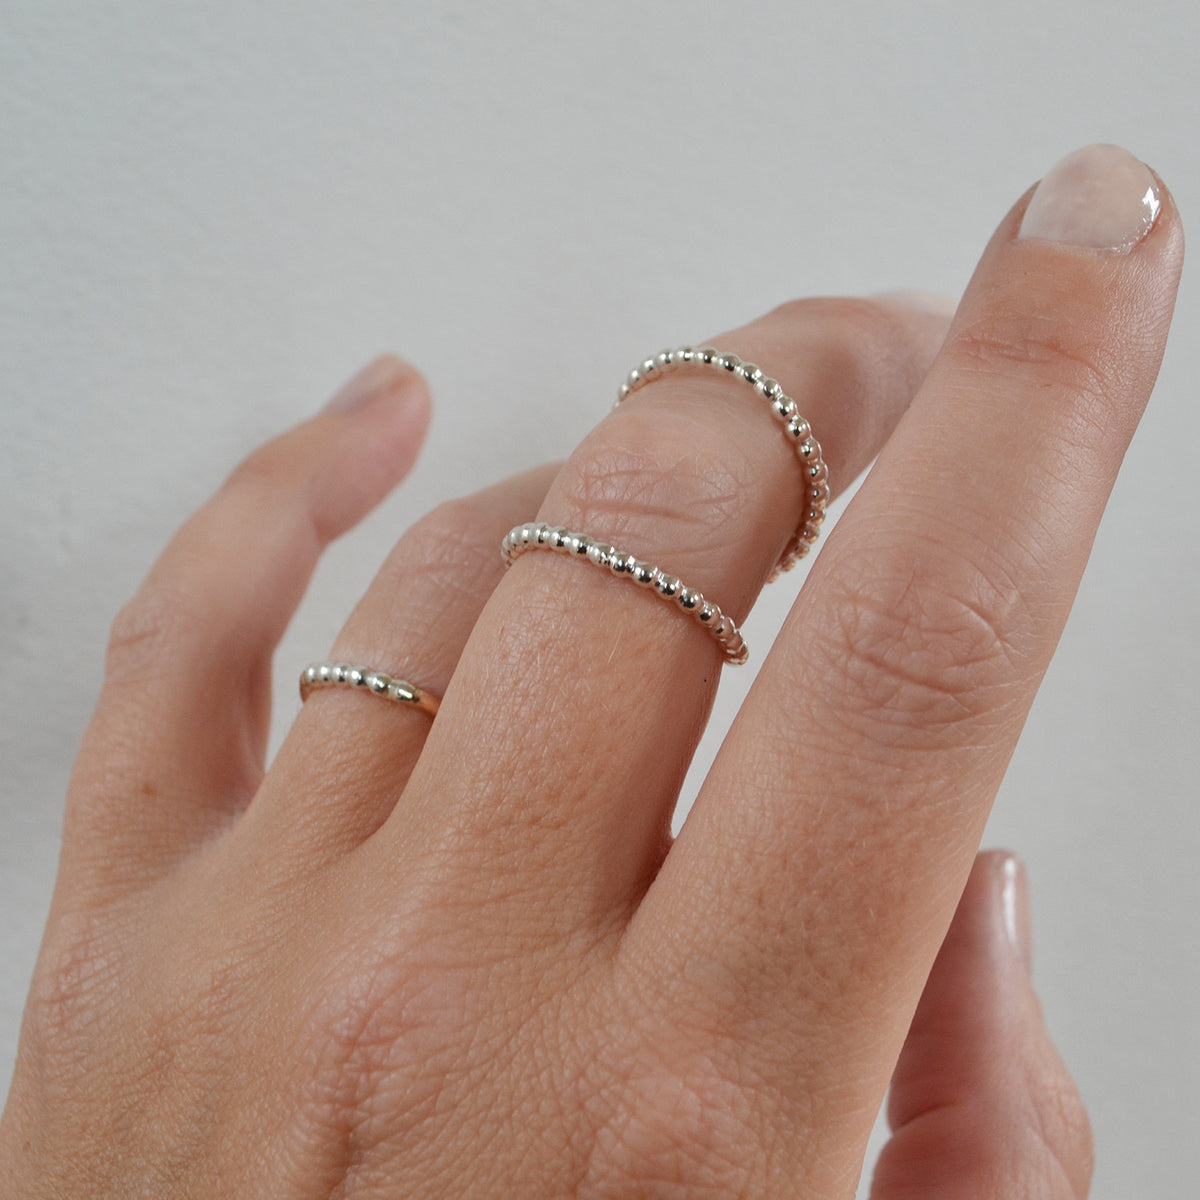 Beaded Double Knuckle Ring, Gold, Rose Gold, or Sterling Silver